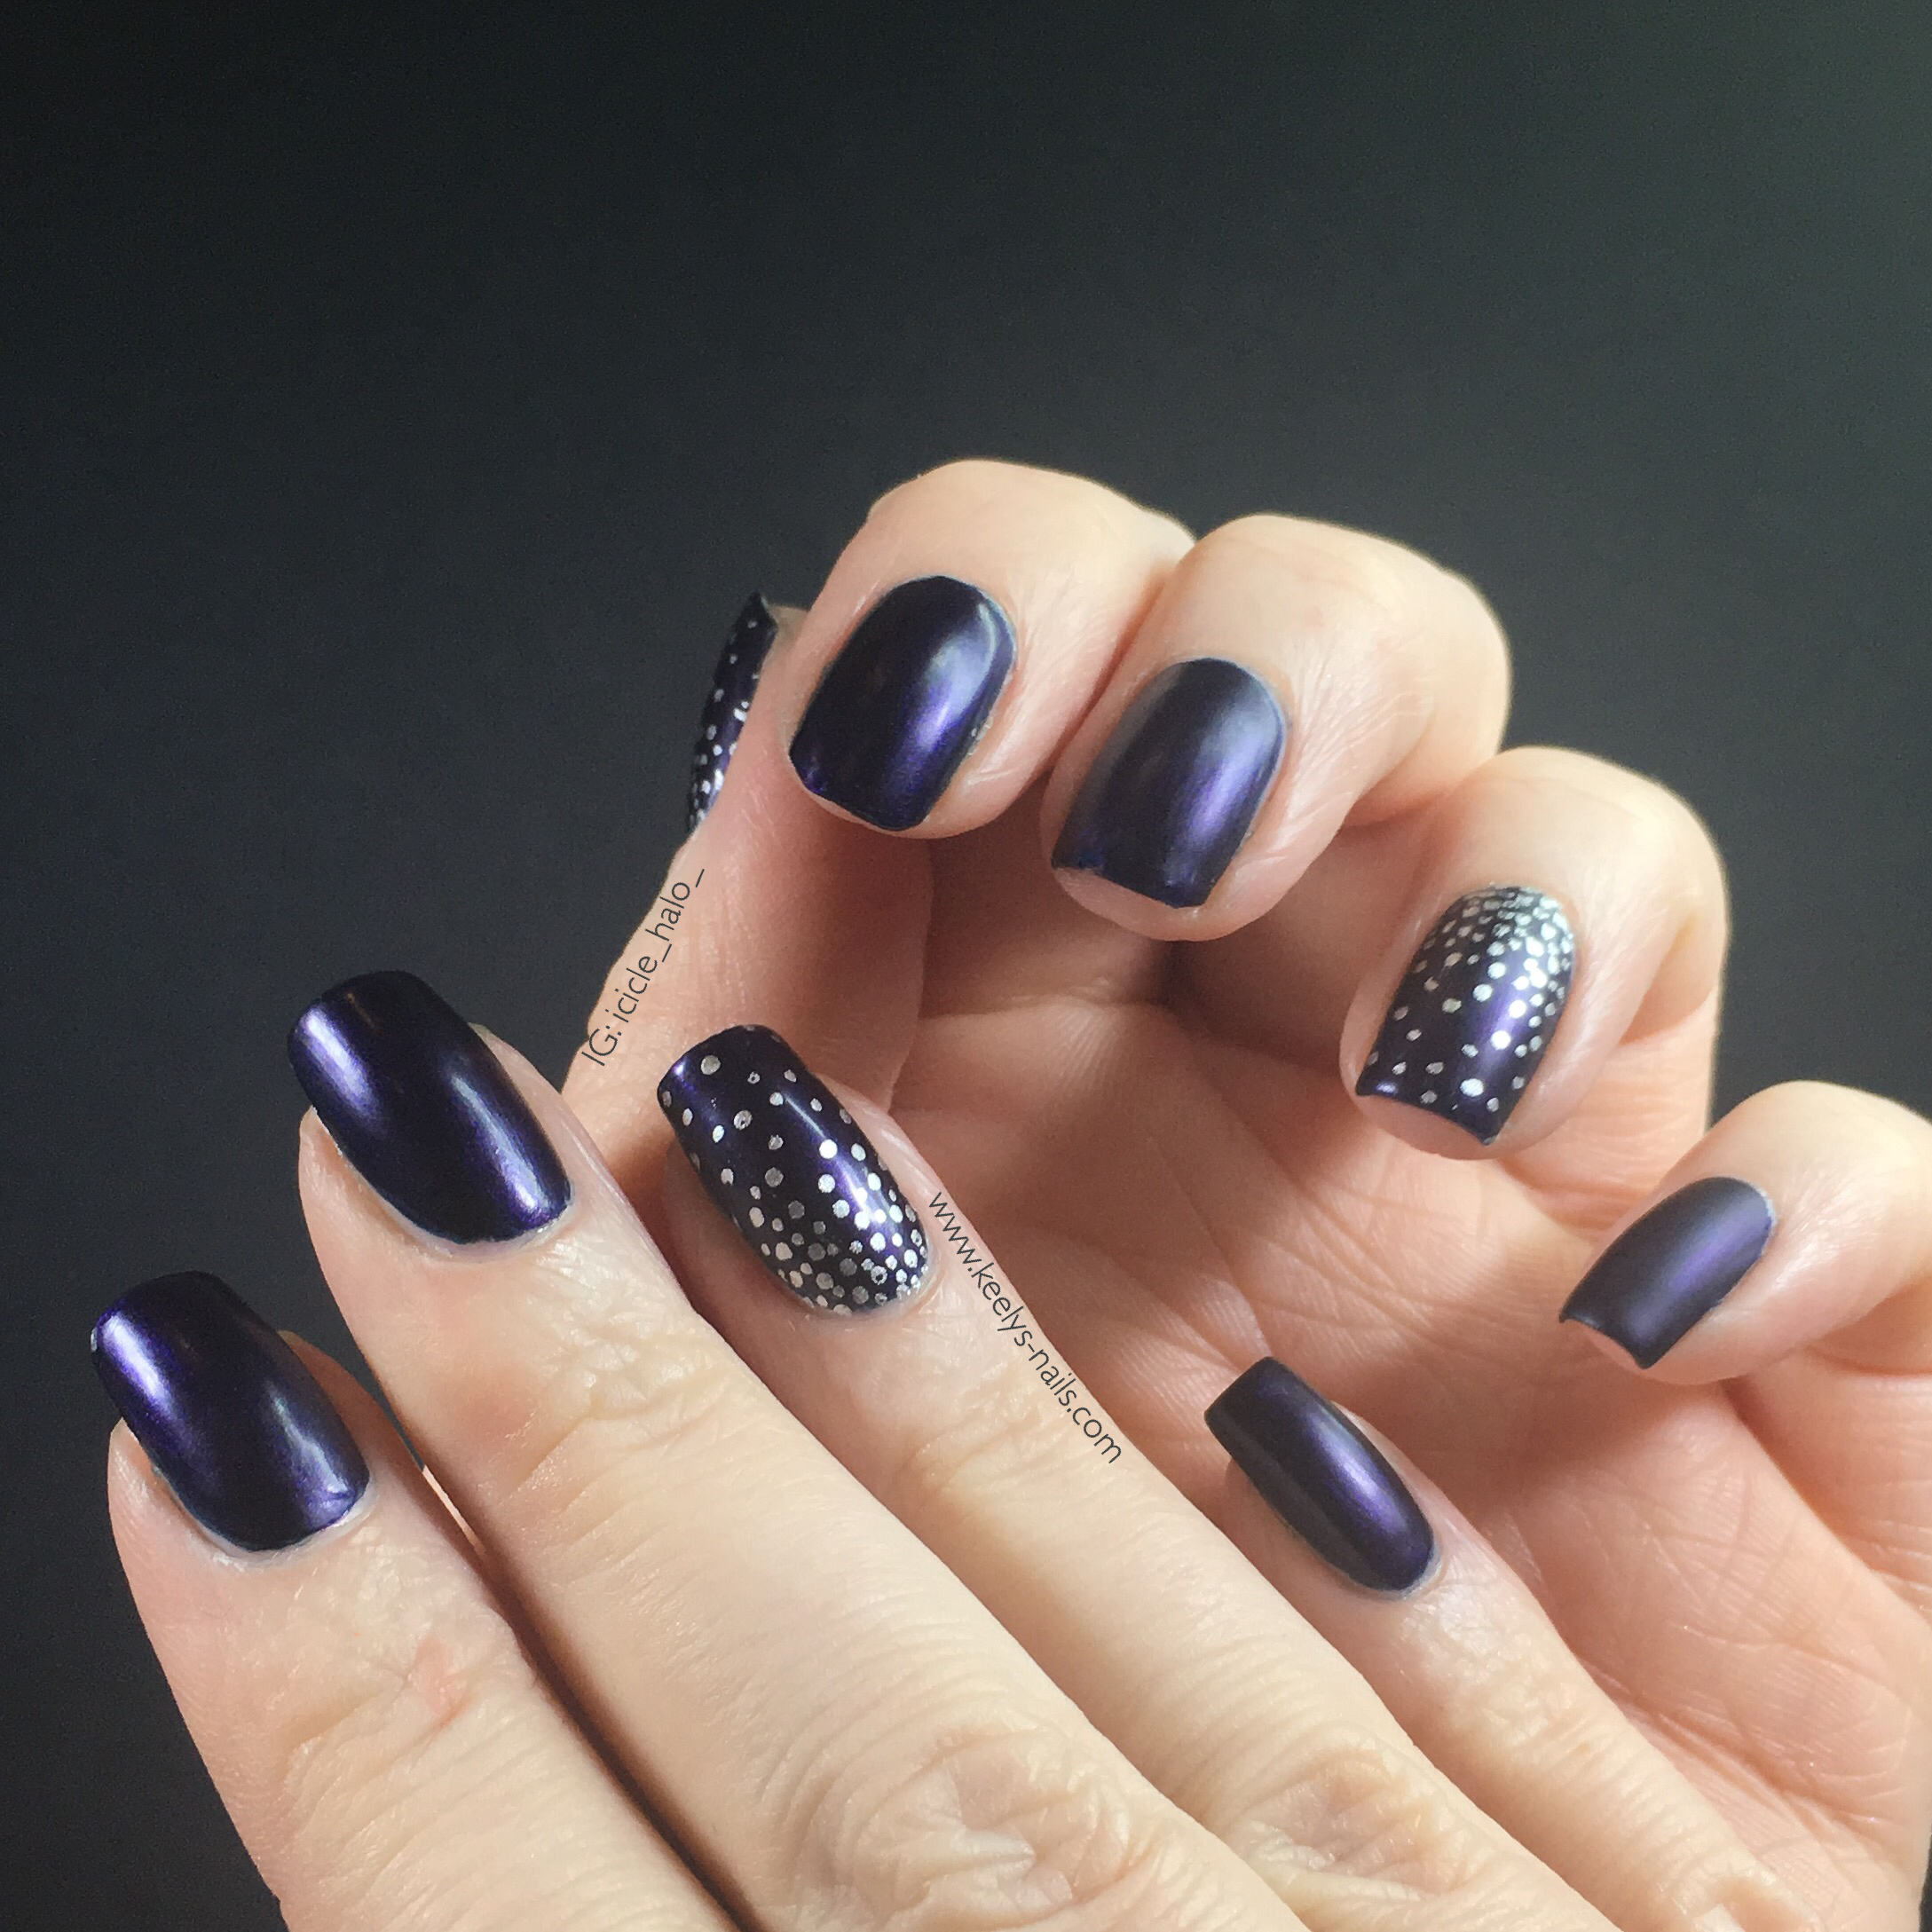 Easy nail art matte navy blue stamped silver - Keely's Nails